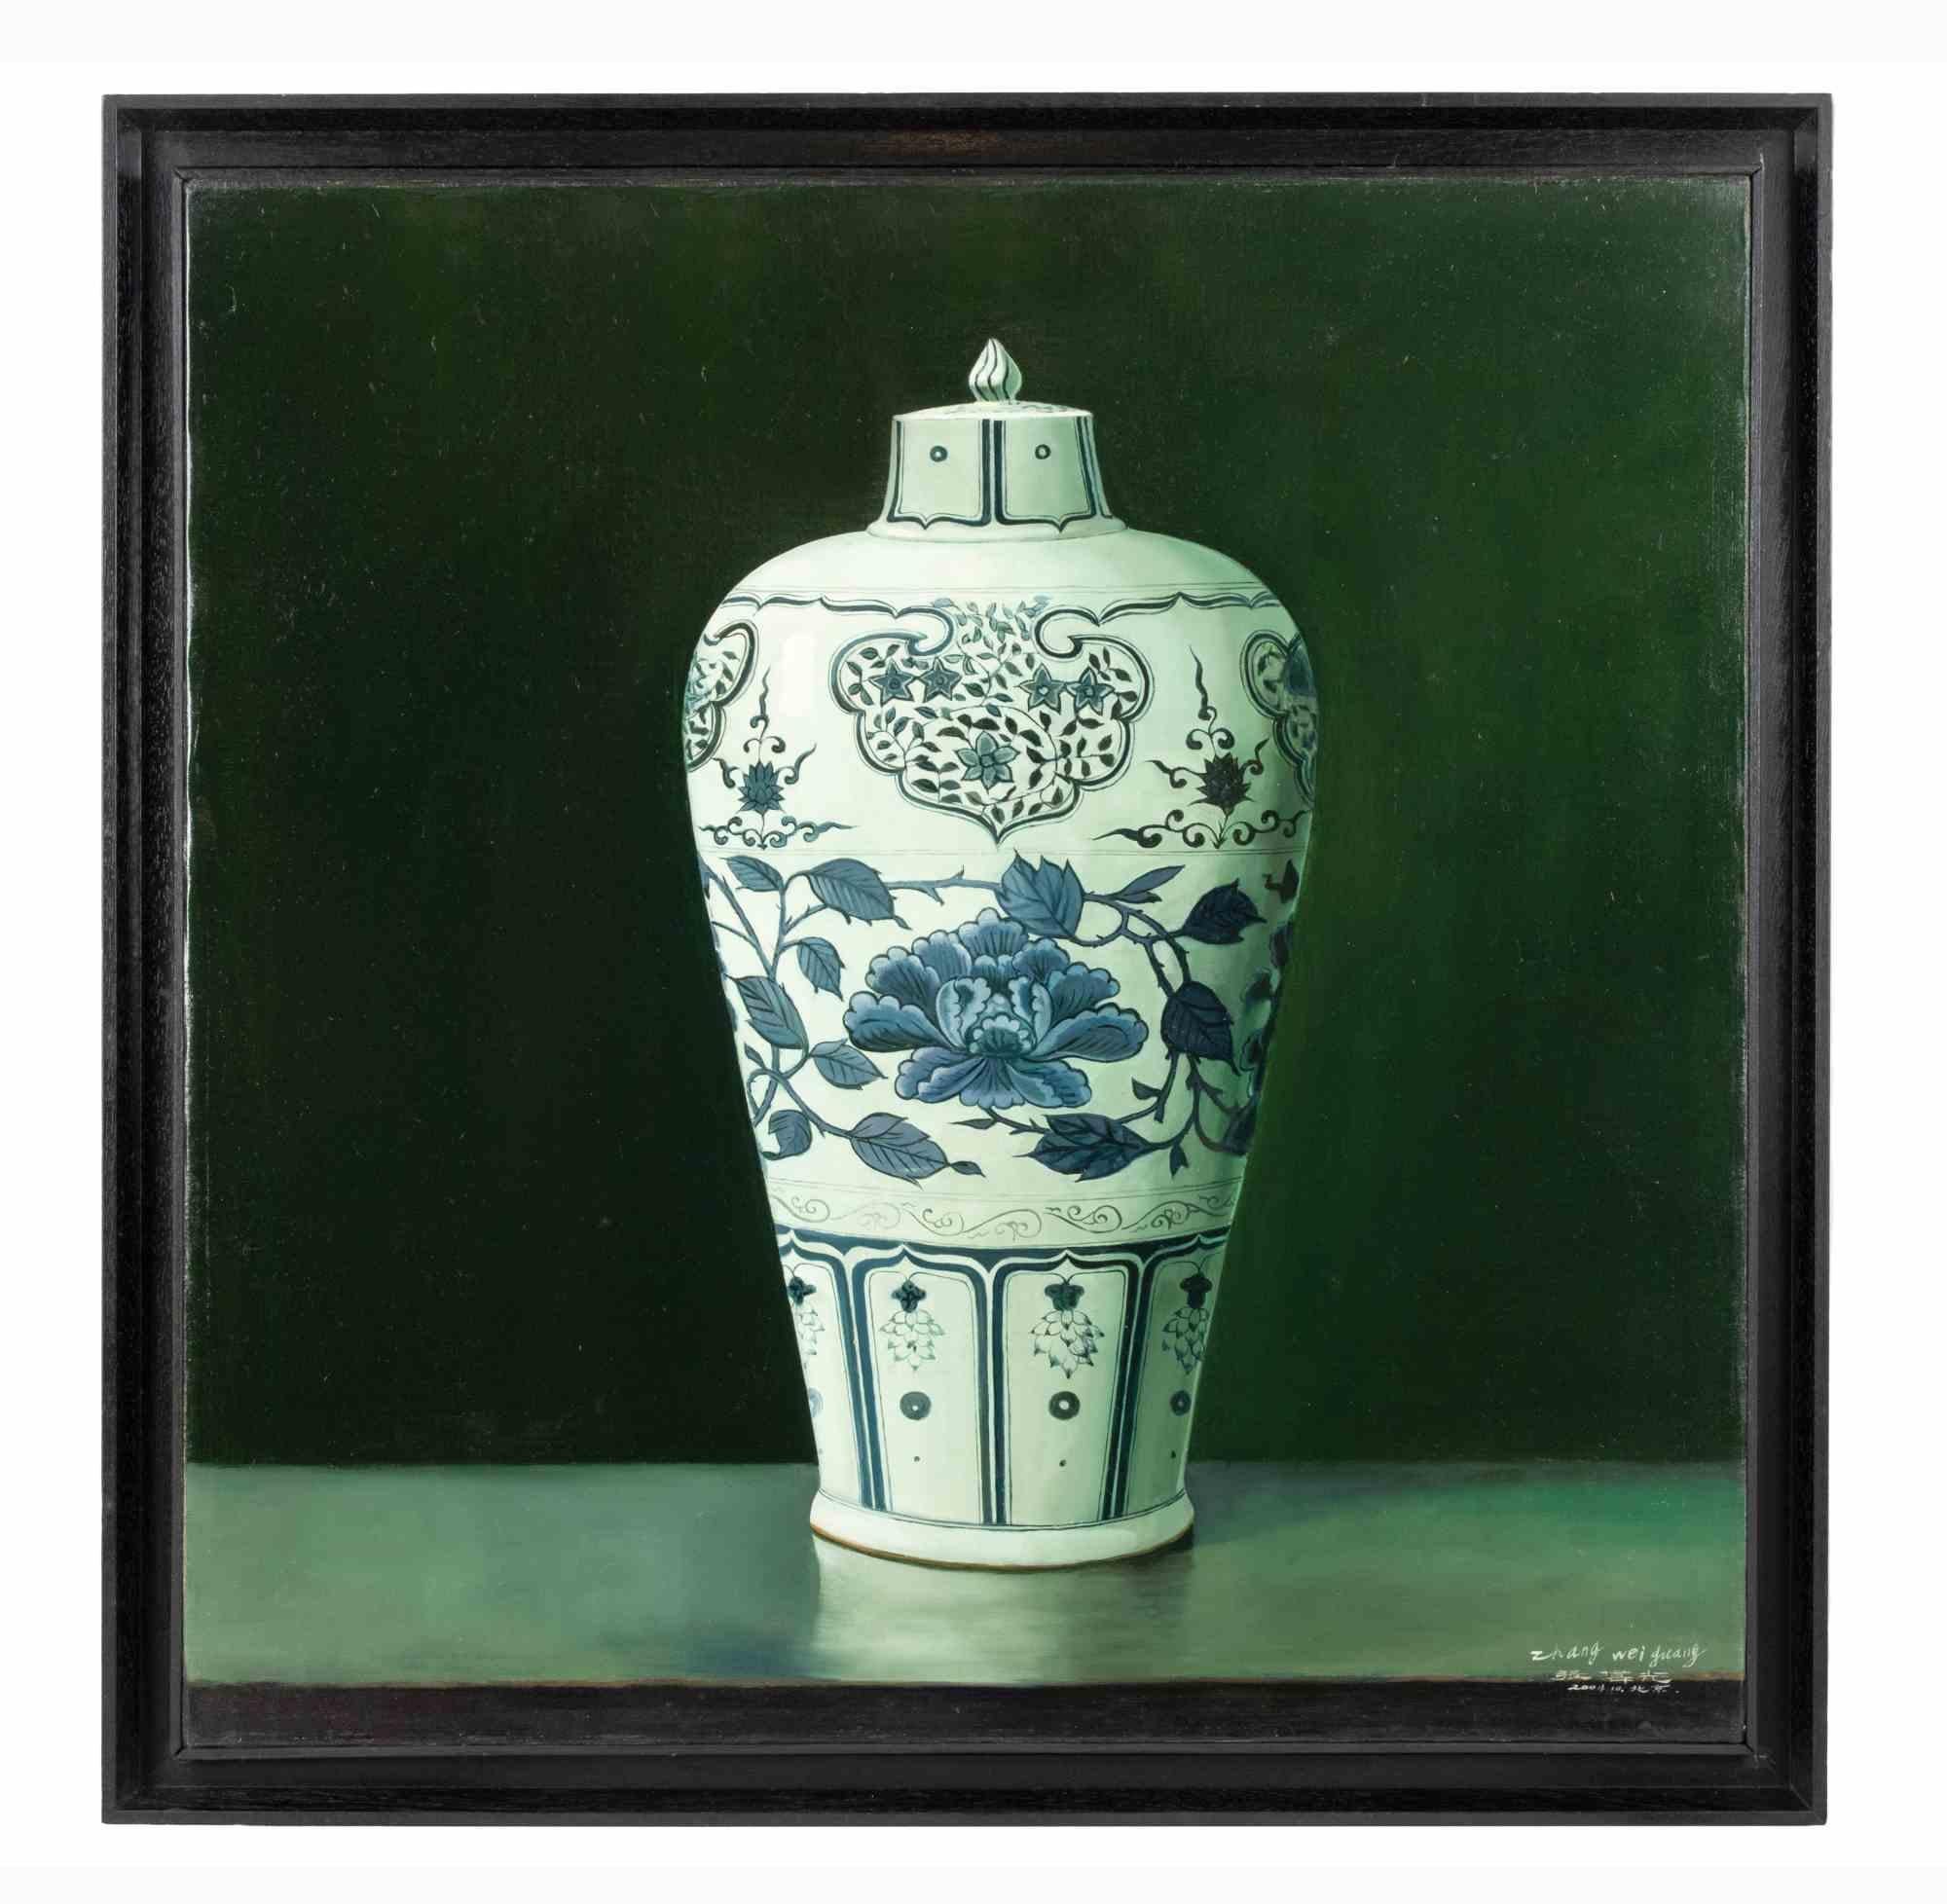 Chinese Vase  is an original oil painting realized in 2004 by Zhang Wei Guang (Mirror).

Oil painting on canvas. 

Hand-signed and dated on the lower right corner.

Excellent condition.

Zhang Wei Guang , also called ‘mirror' was born in Helong